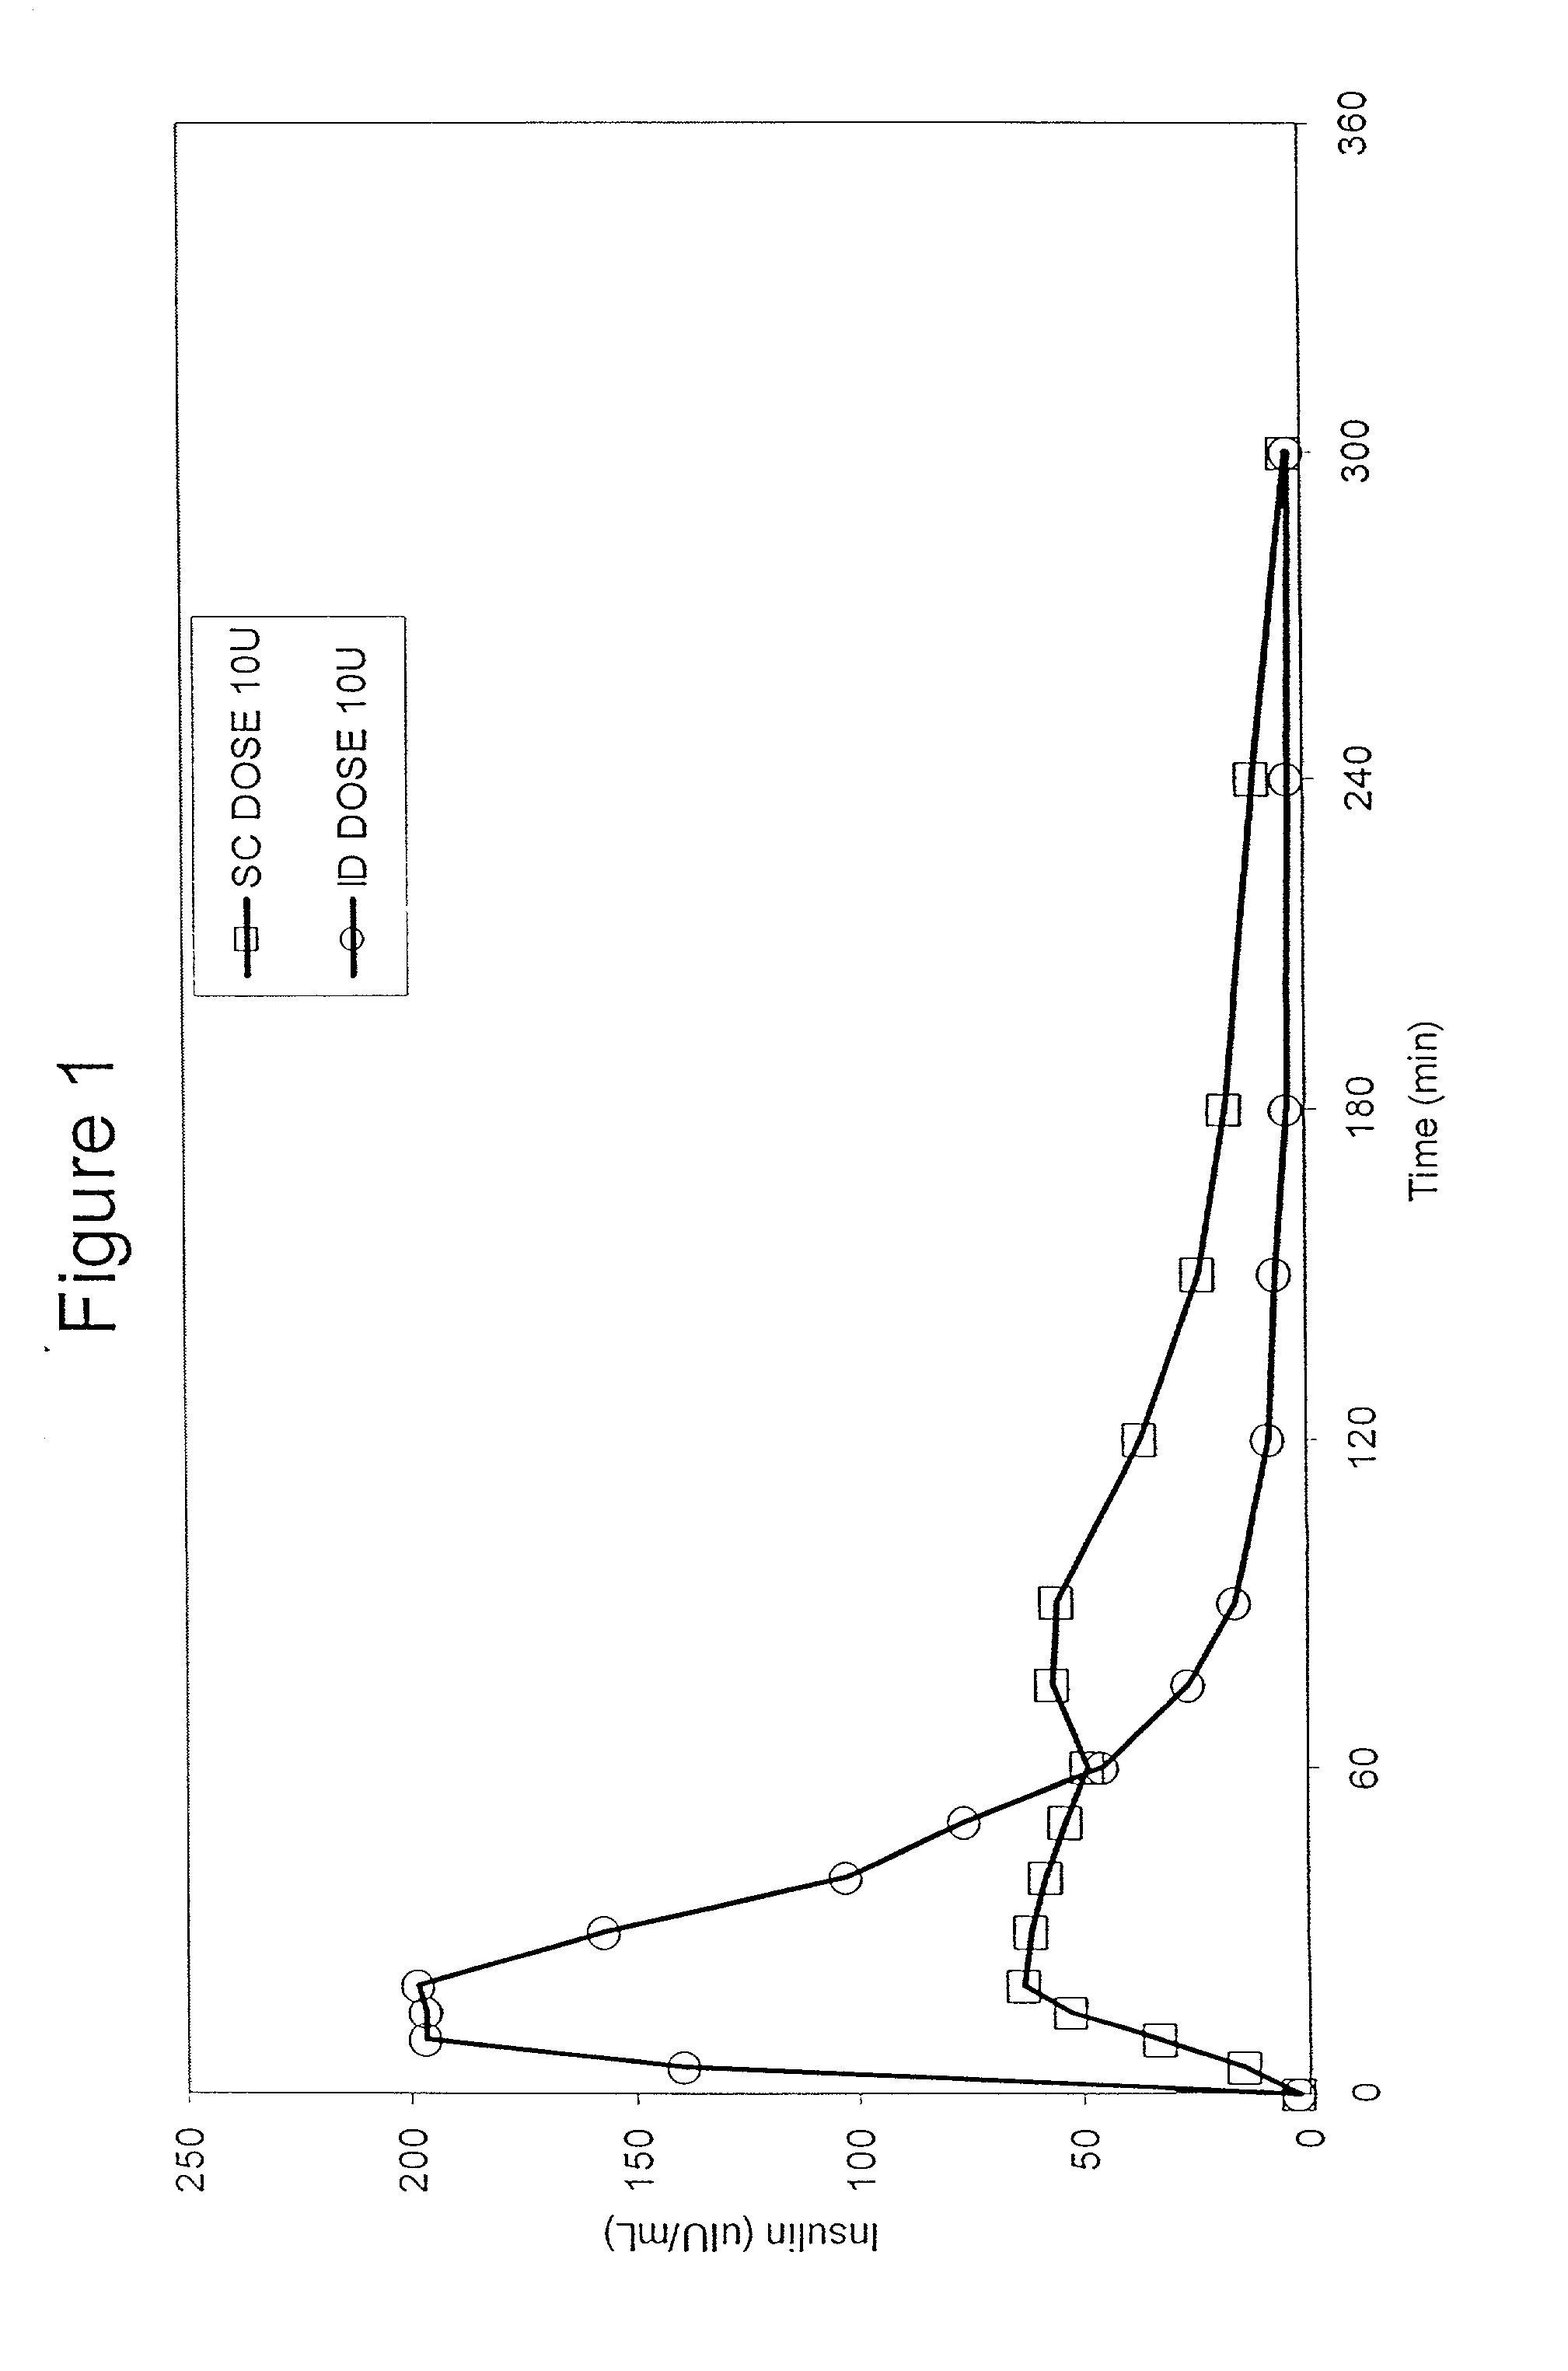 Method and device for reducing therapeutic dosage